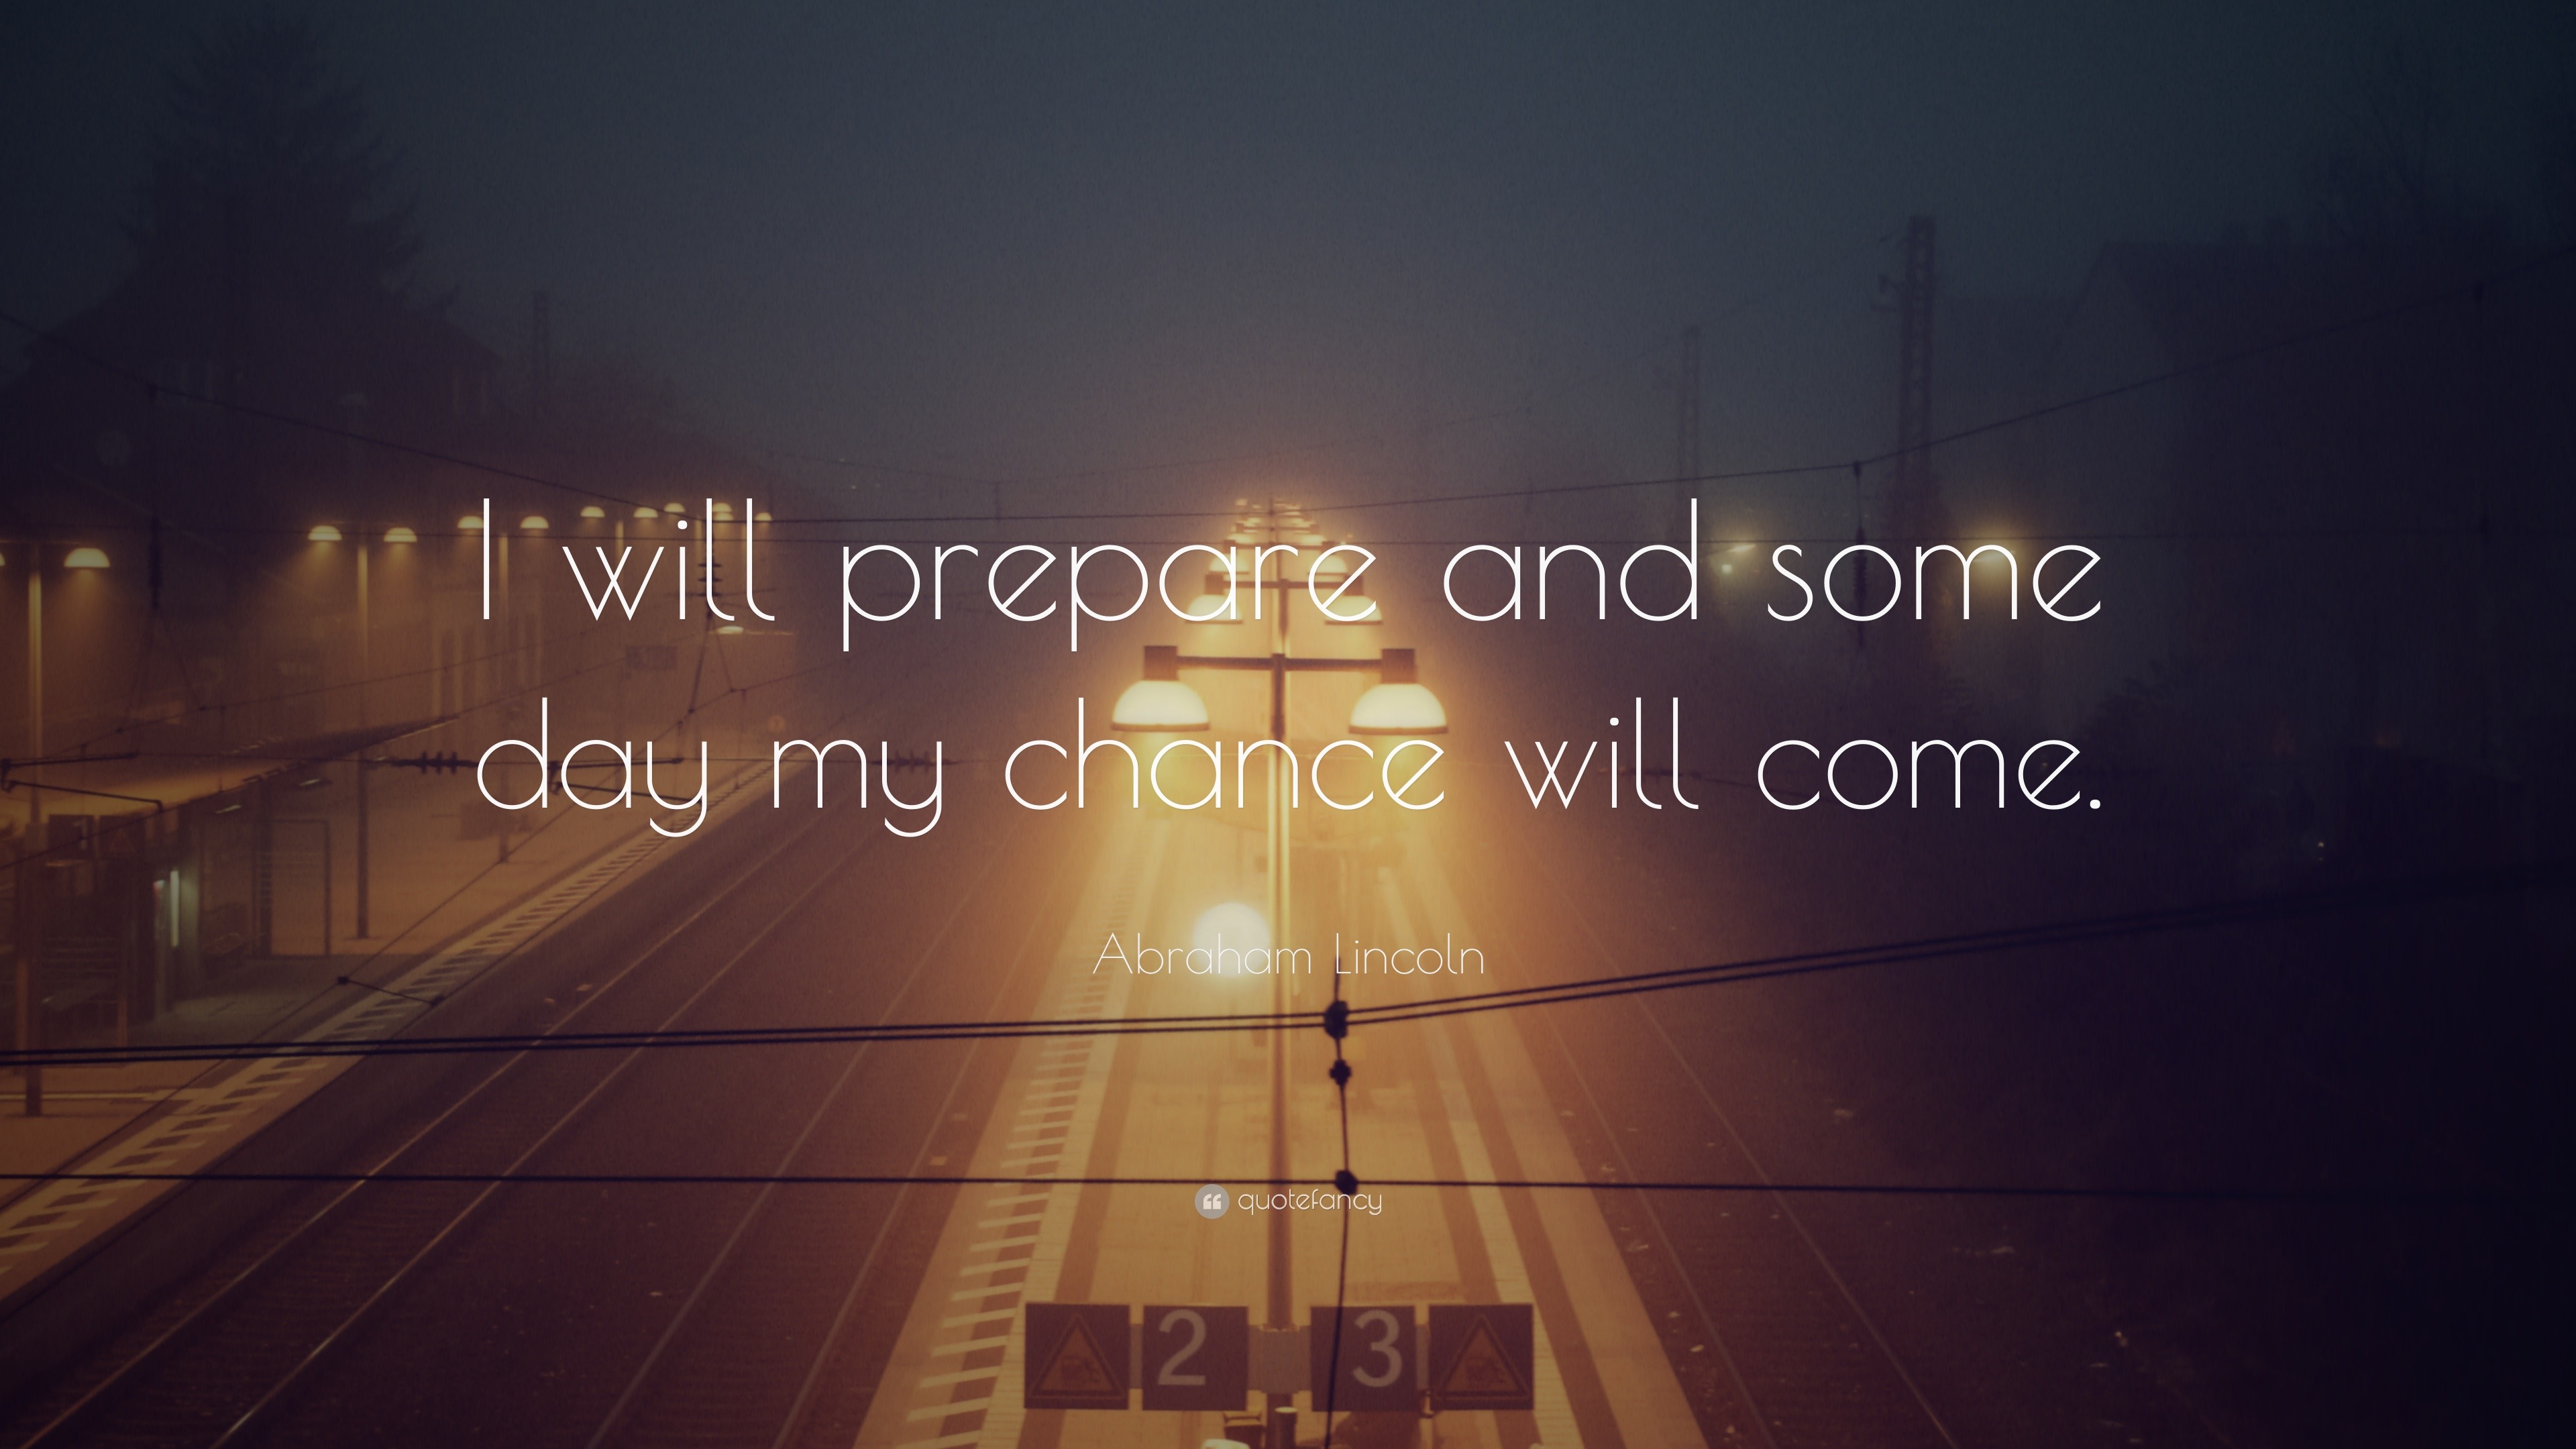 Abraham Lincoln Quote: “I will prepare and some day my chance will come.” (24 ...3840 x 2160